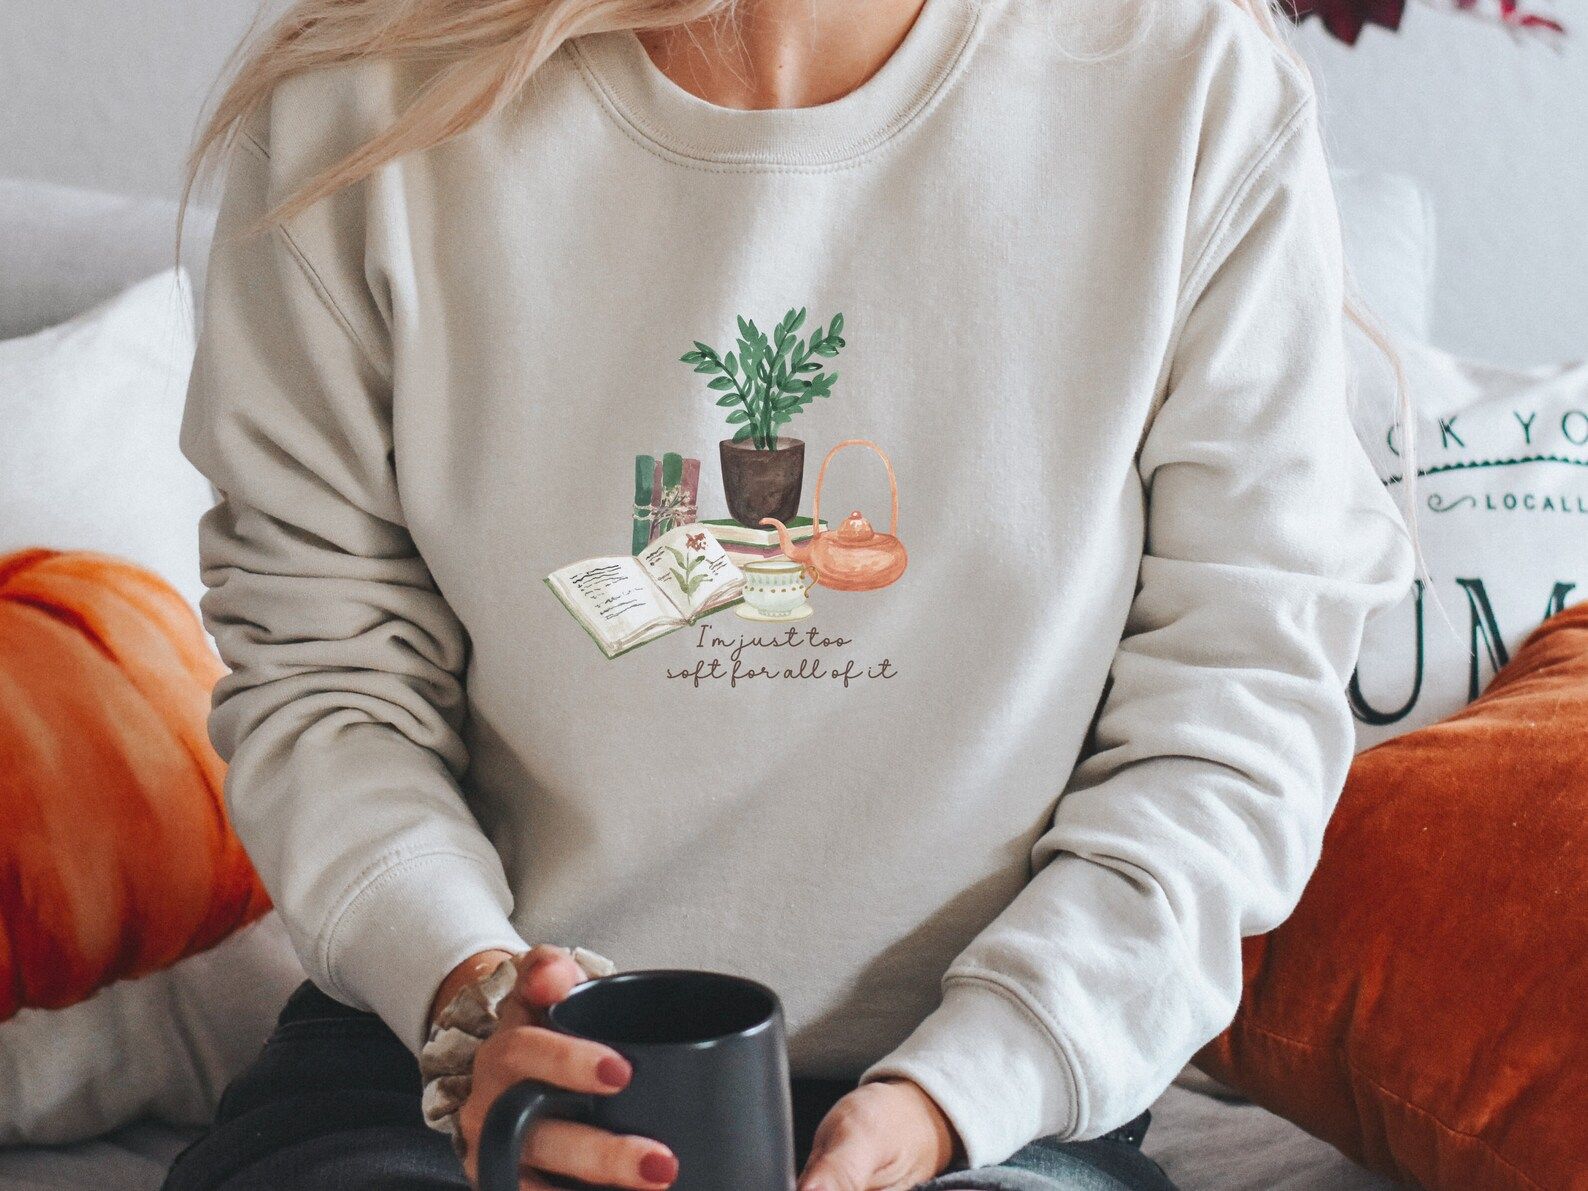 a sweatshirt with books, tea kettle, and plants on it that reads "I'm just too soft for all of it"